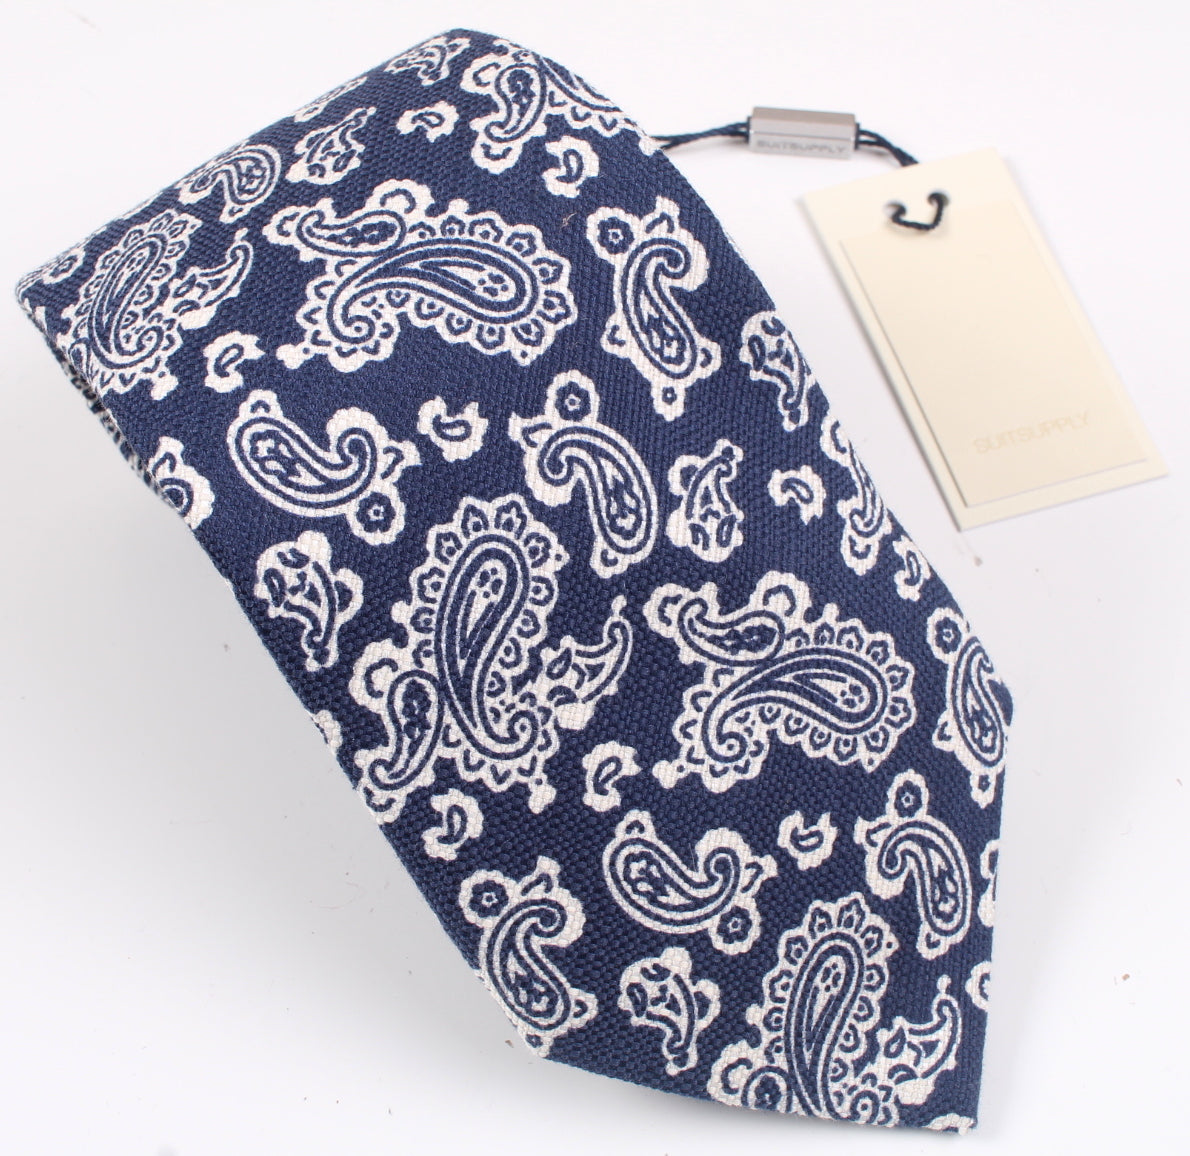 New SUITSUPPLY Navy Paisley Tie